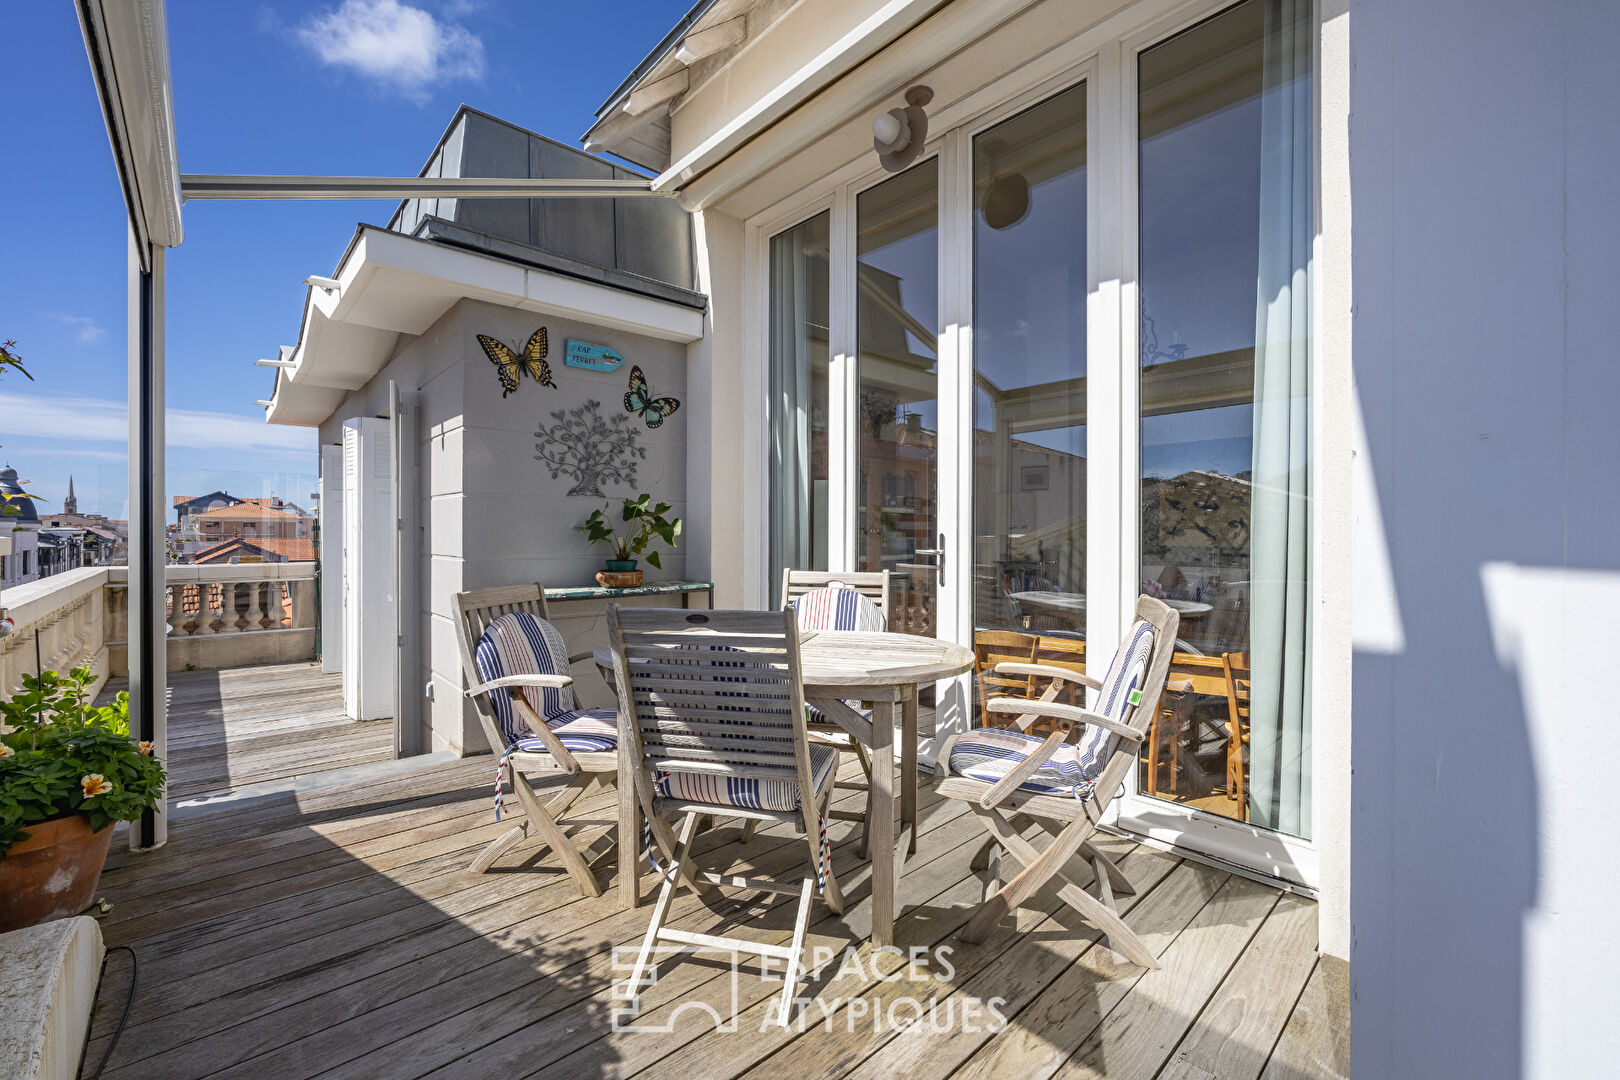 Exceptional top floor apartment in the center of Arcachon